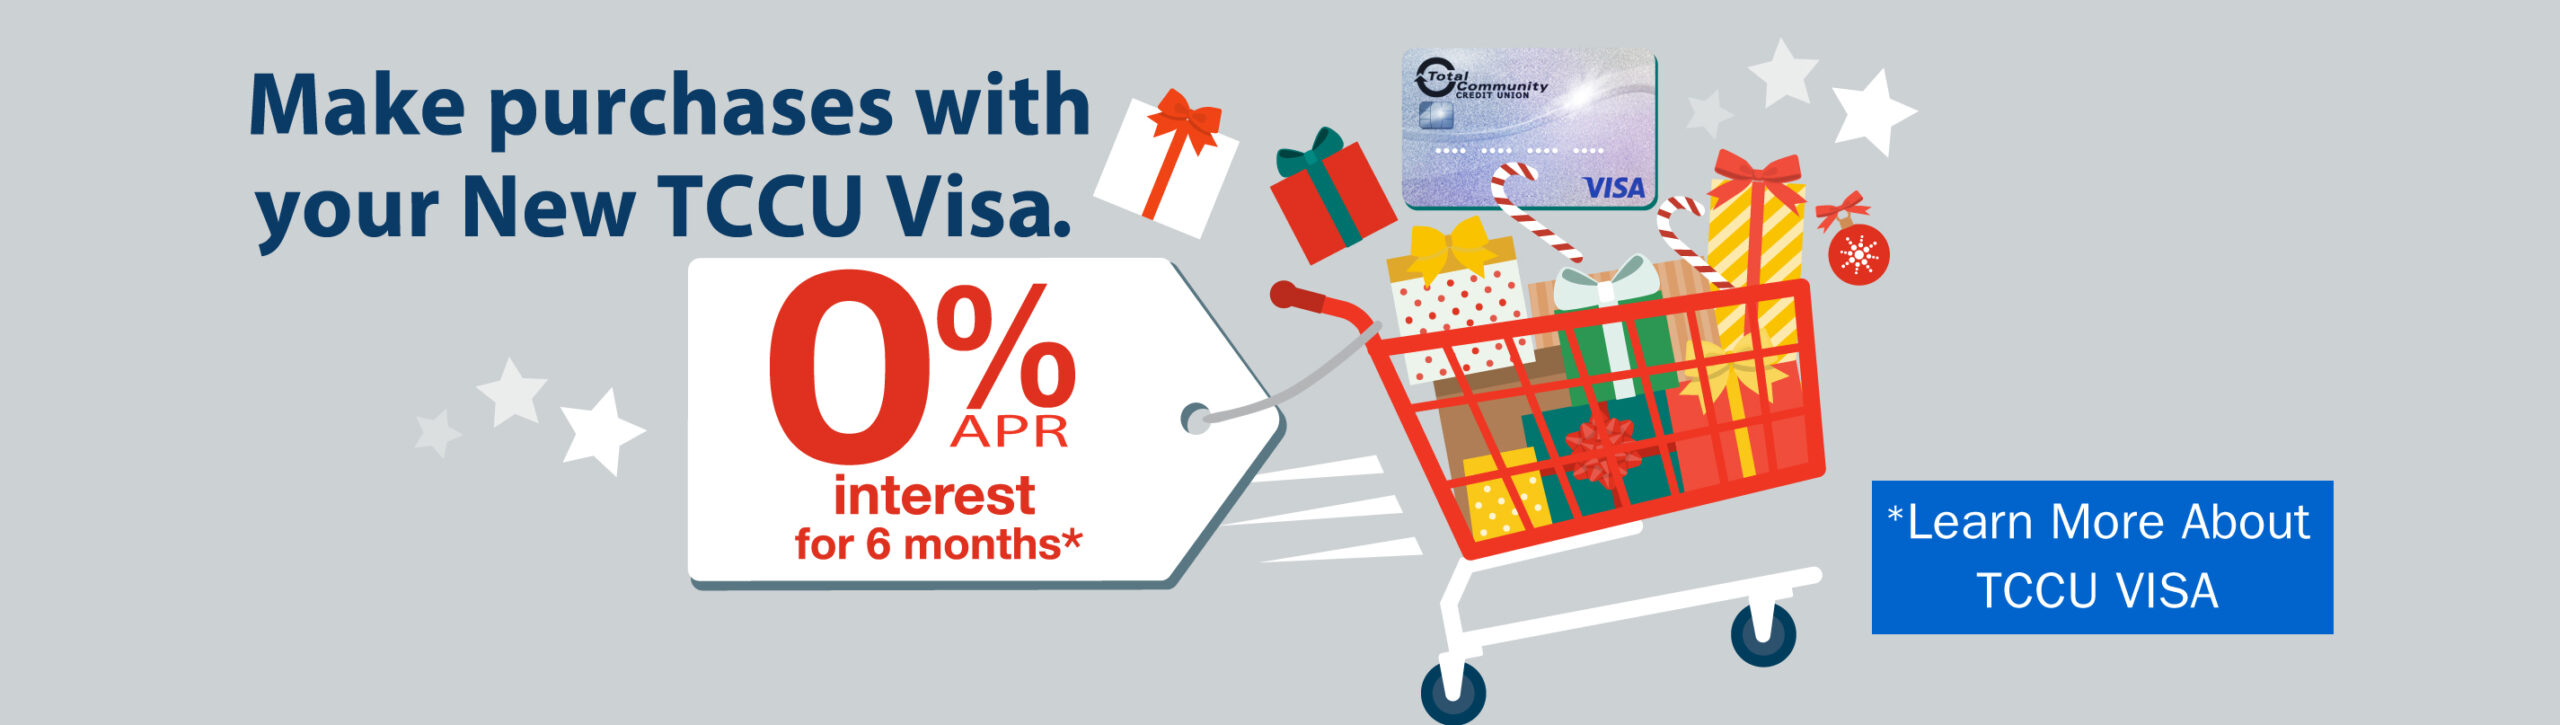 Make purchases with new tccu visa and enjoy 0% apr interest for the for six months. Learn more about Visa.